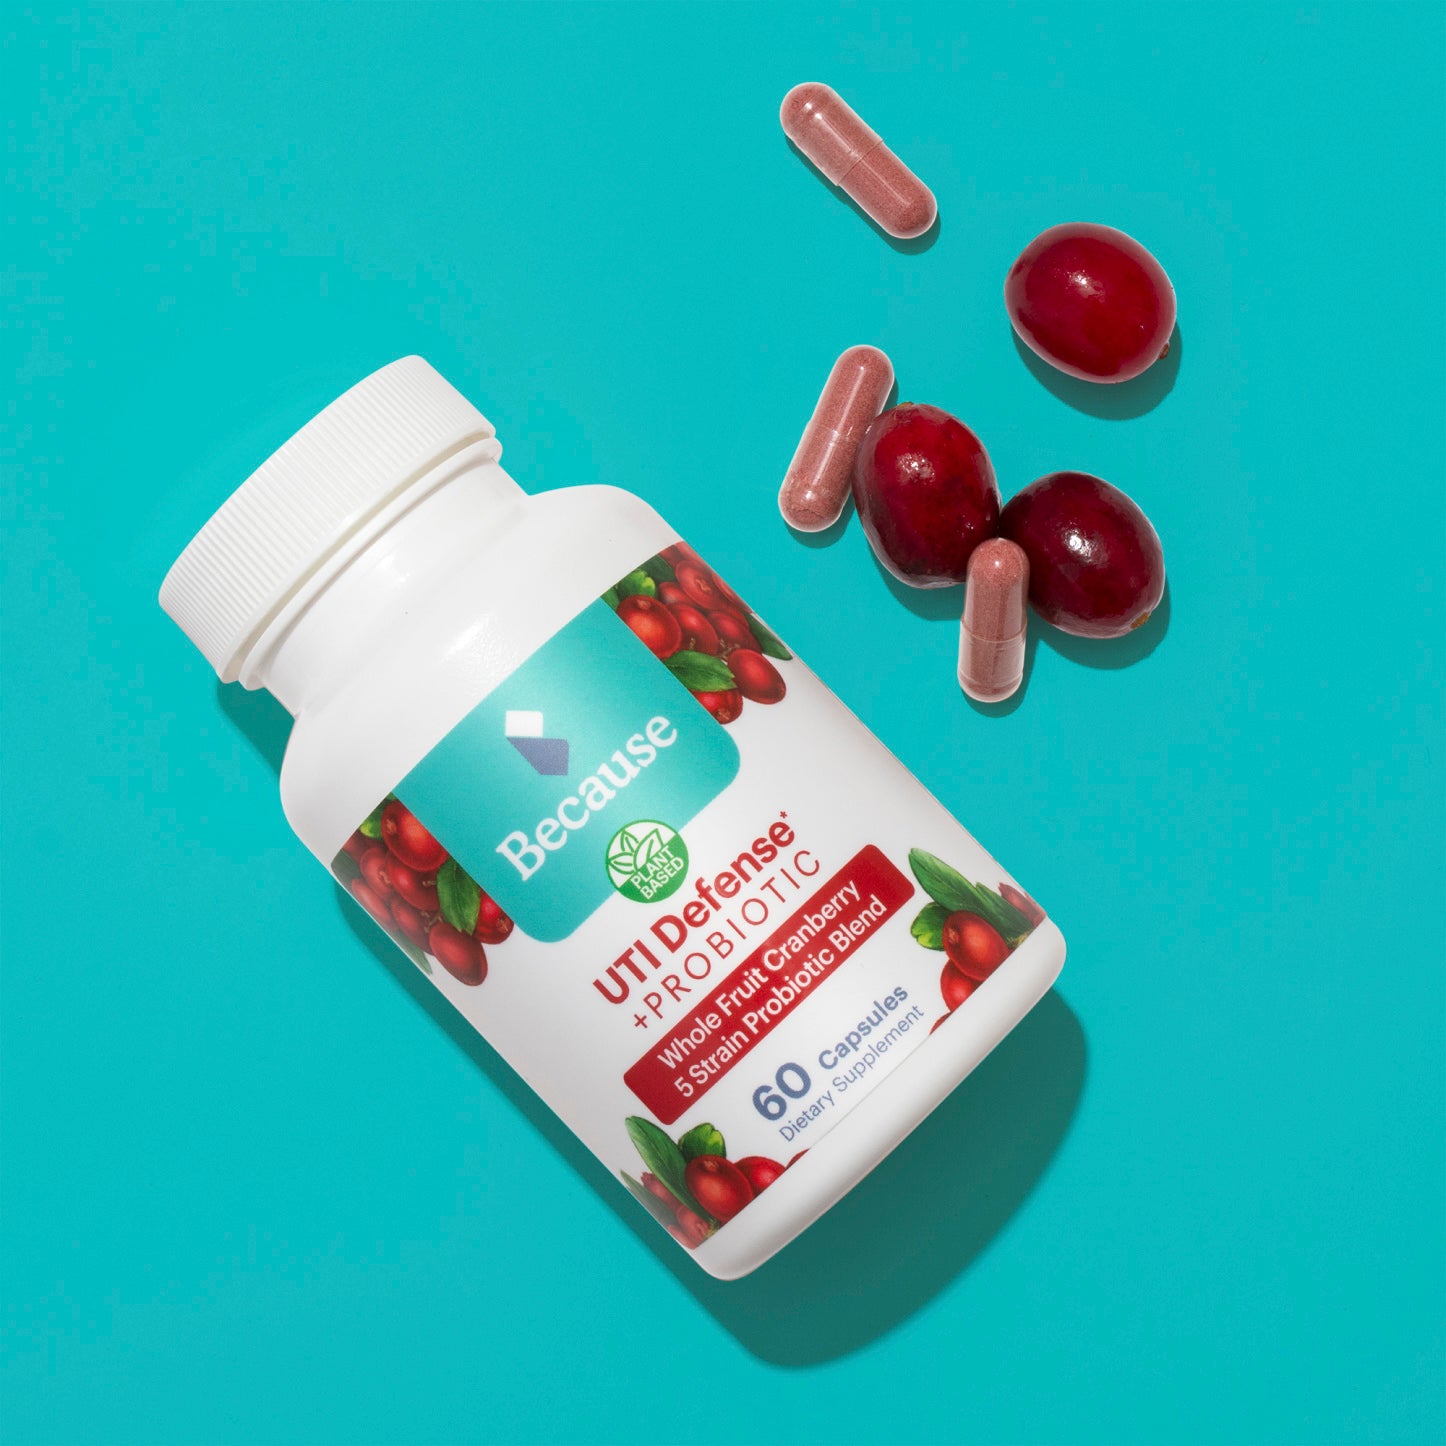 Blue background with white UTI Defense + Probiotic bottle next to three red capsules and three cranberries.